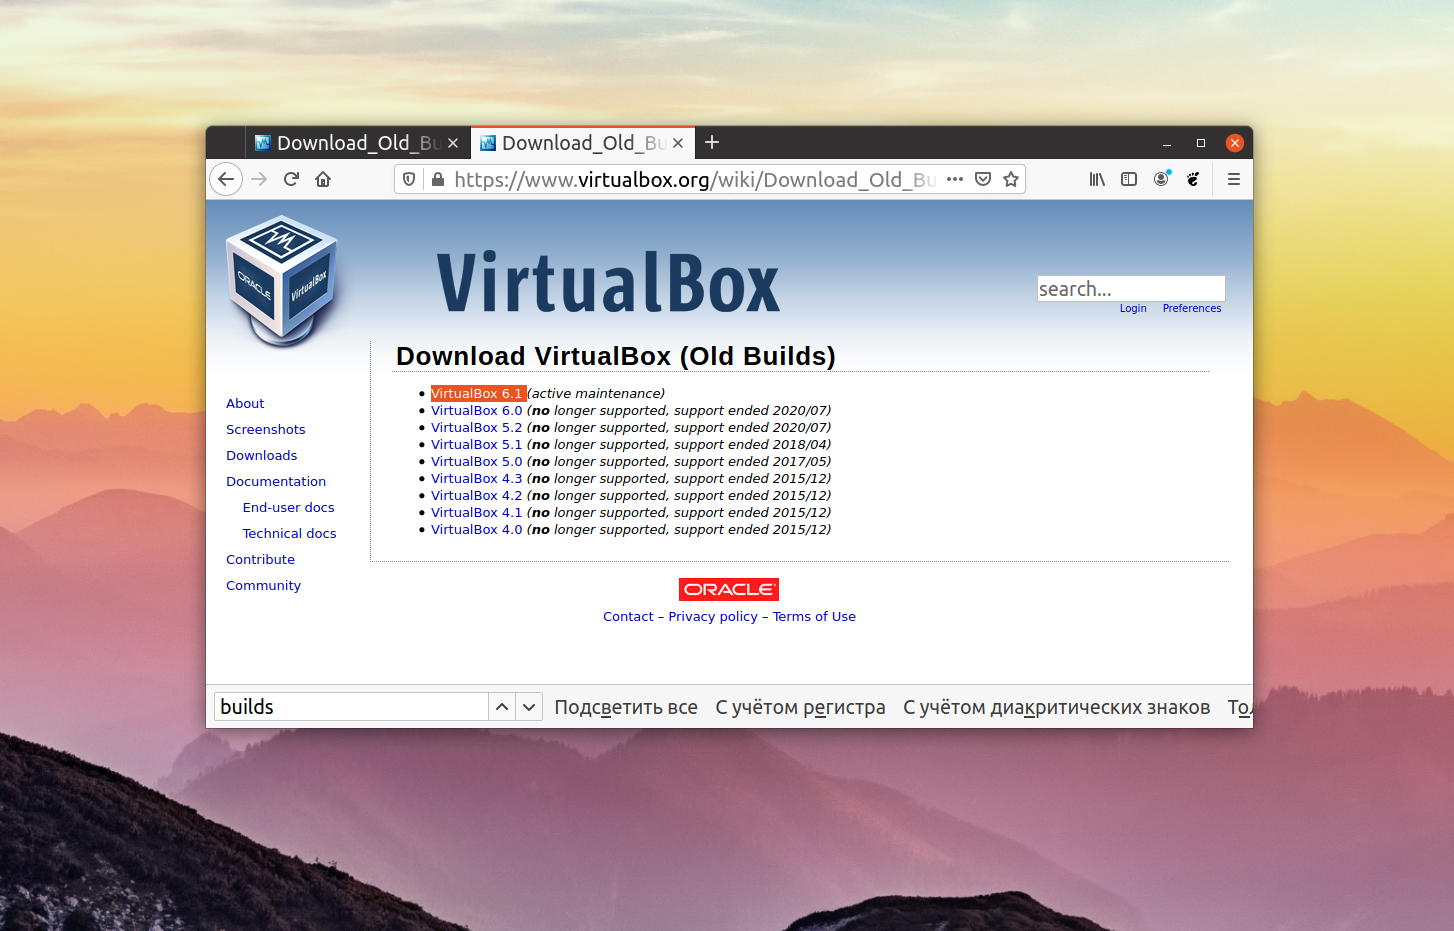 Oracle vm extension pack. Oracle VM VIRTUALBOX. Установка Oracle VM VIRTUALBOX. VIRTUALBOX Extension Pack. VIRTUALBOX И VM VIRTUALBOX Extension Pack.